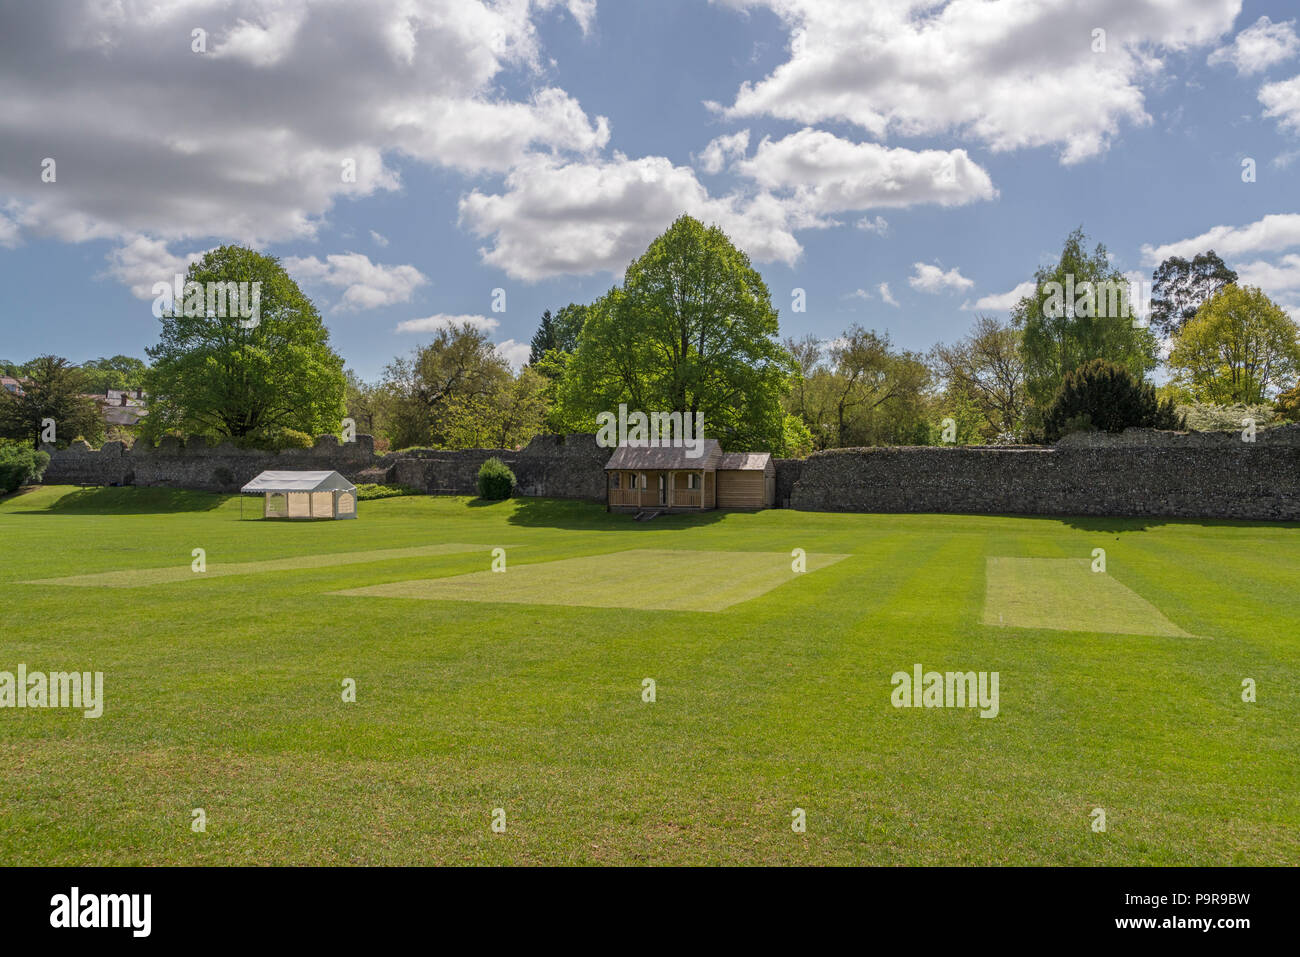 Winchester college sports ground bordered with part of the old city wall, Hampshire, England. Stock Photo